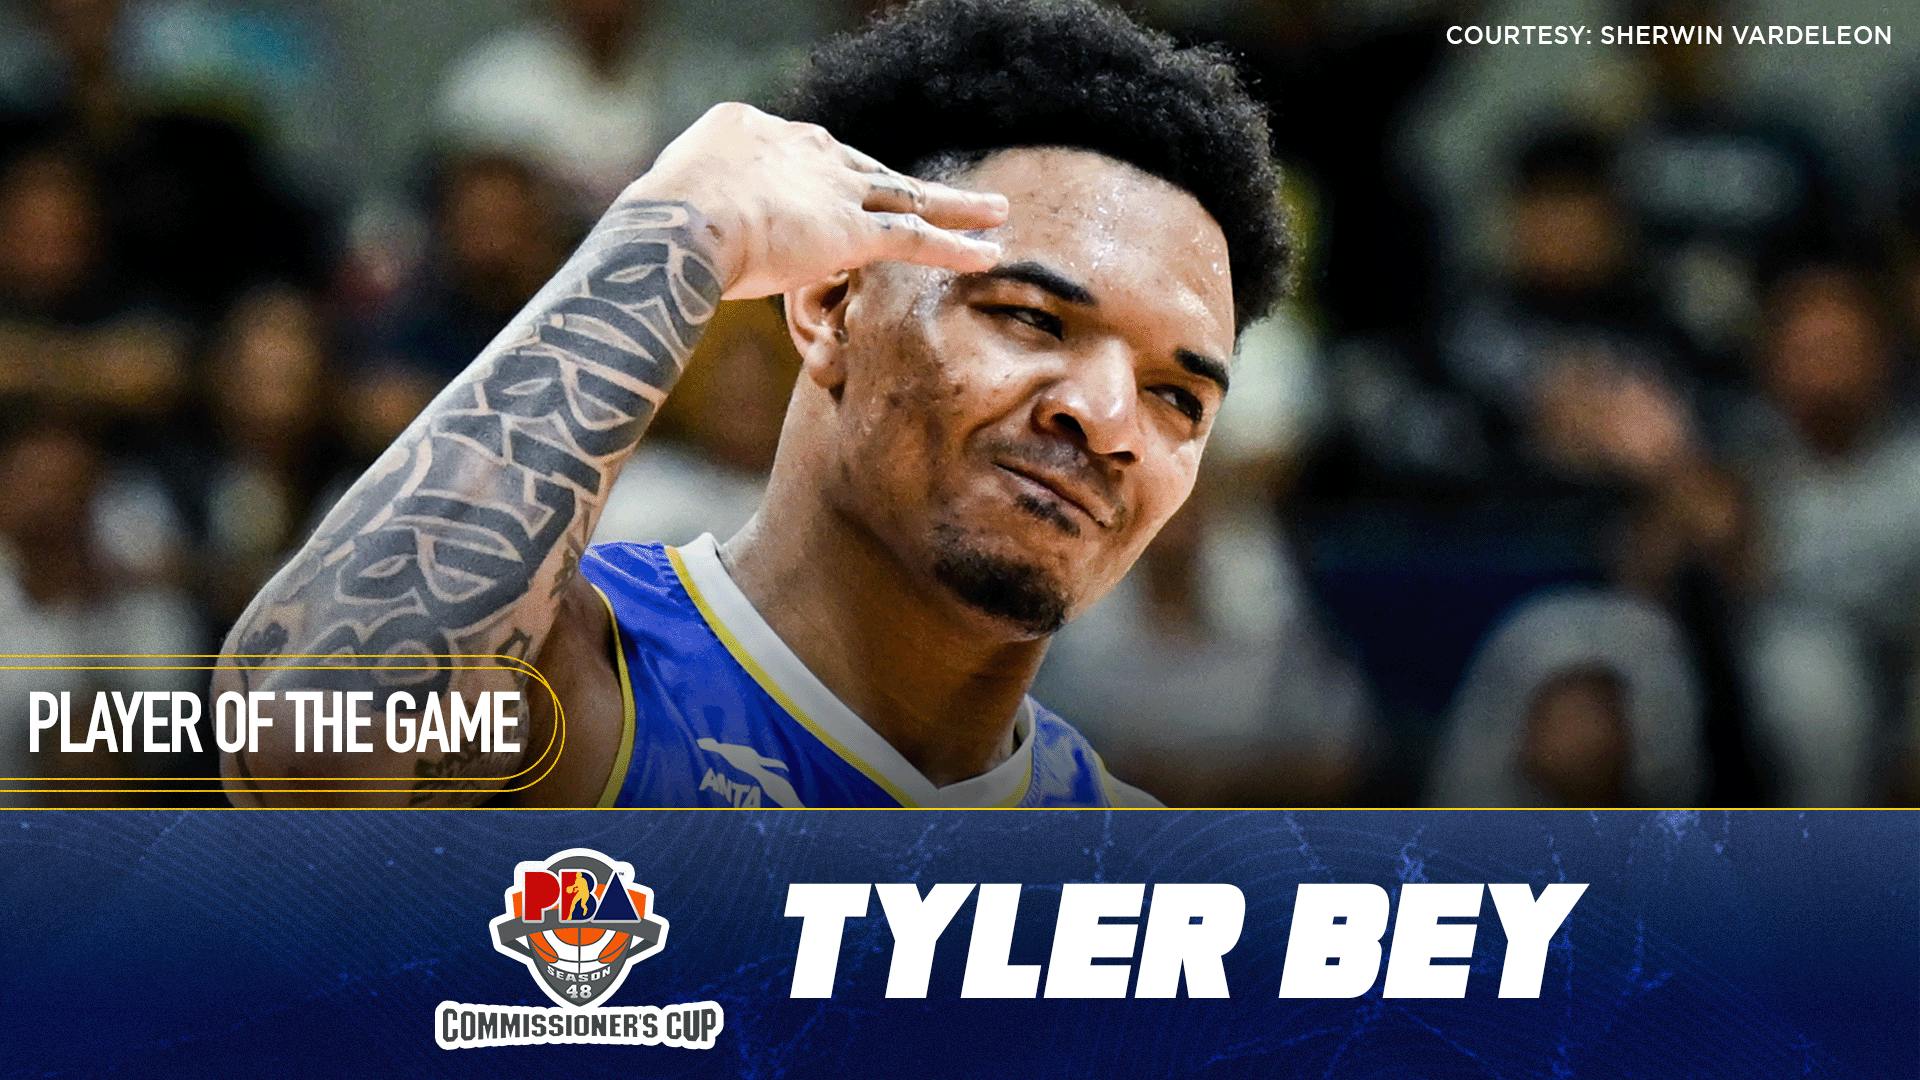 PBA: Tyler Bey powers Magnolia to series-tying win in Commissioner